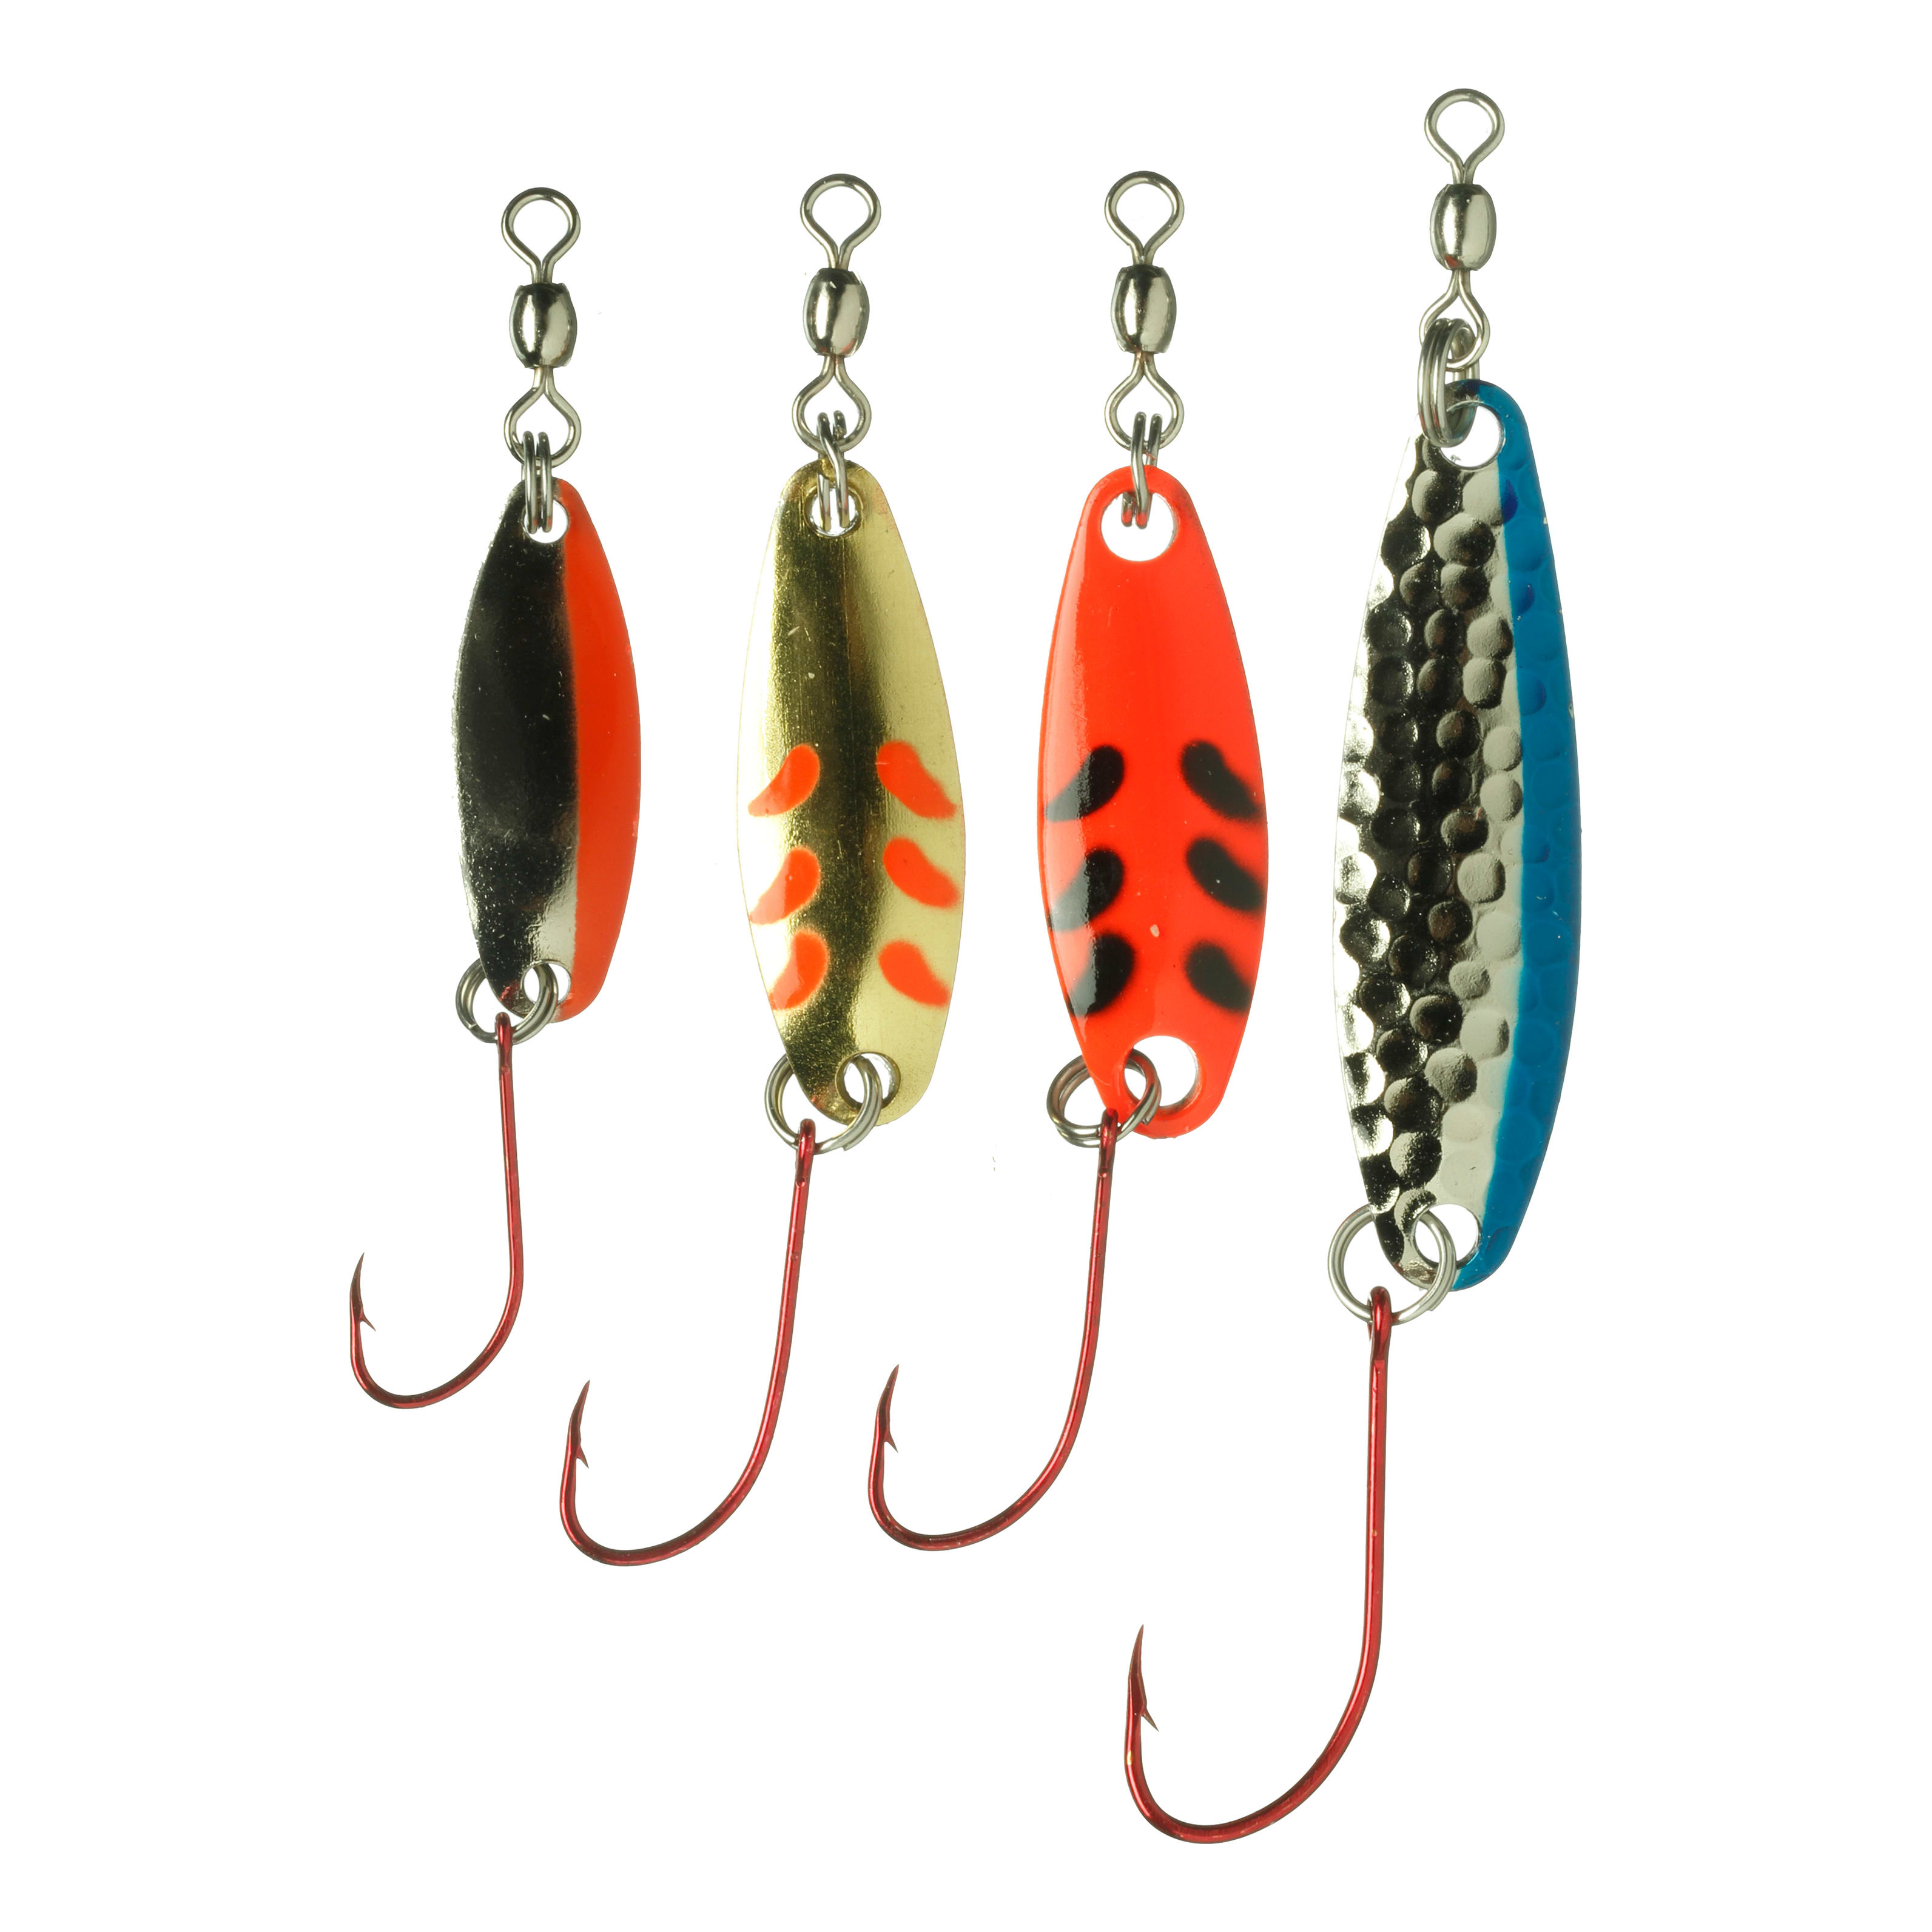 1oz Crocodile Casting Spoons Fishing Lures-Choose Color and Qty (3 to 50)